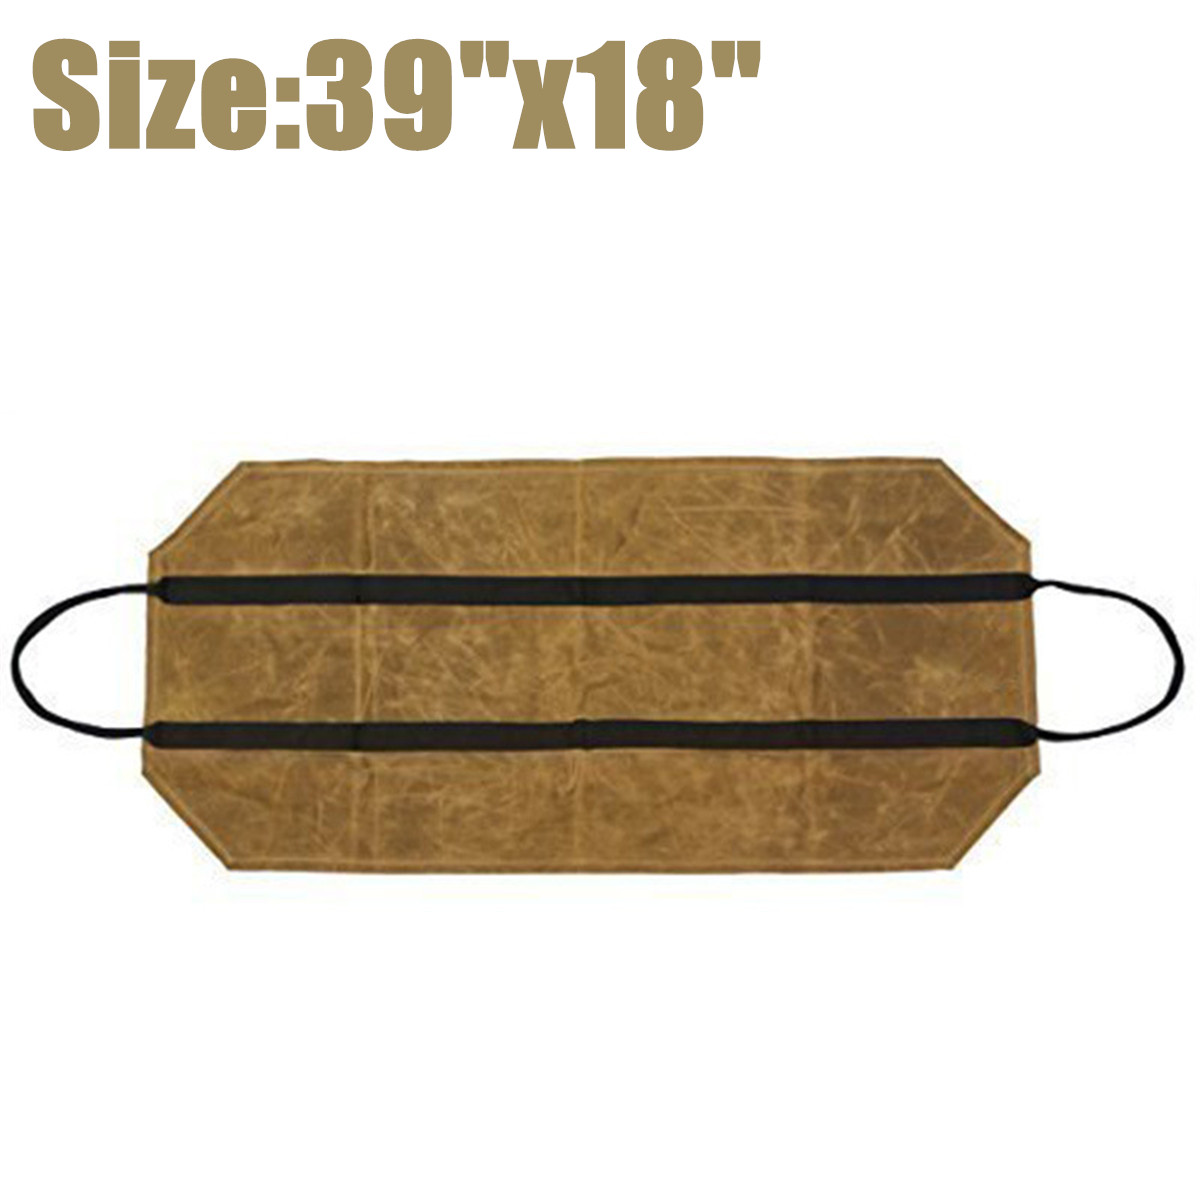 khaki-Firewood-Carrier-Log-Carrier-Wood-Carrying-Tool-Bag-for-Fireplace-Waxed-Canvas-1388831-4